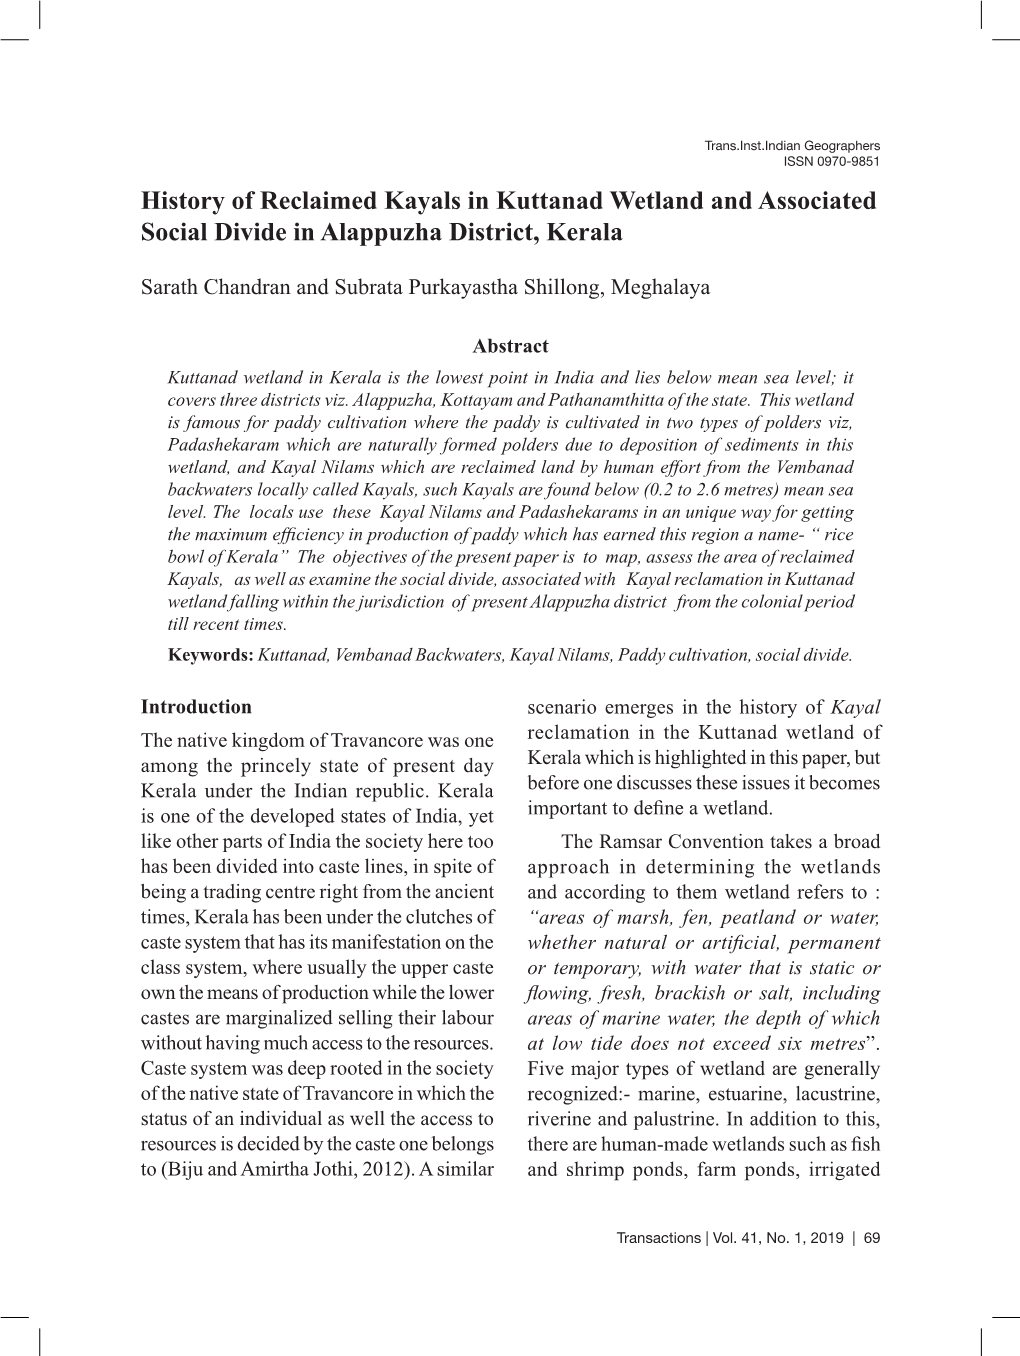 History of Reclaimed Kayals in Kuttanad Wetland and Associated Social Divide in Alappuzha District, Kerala